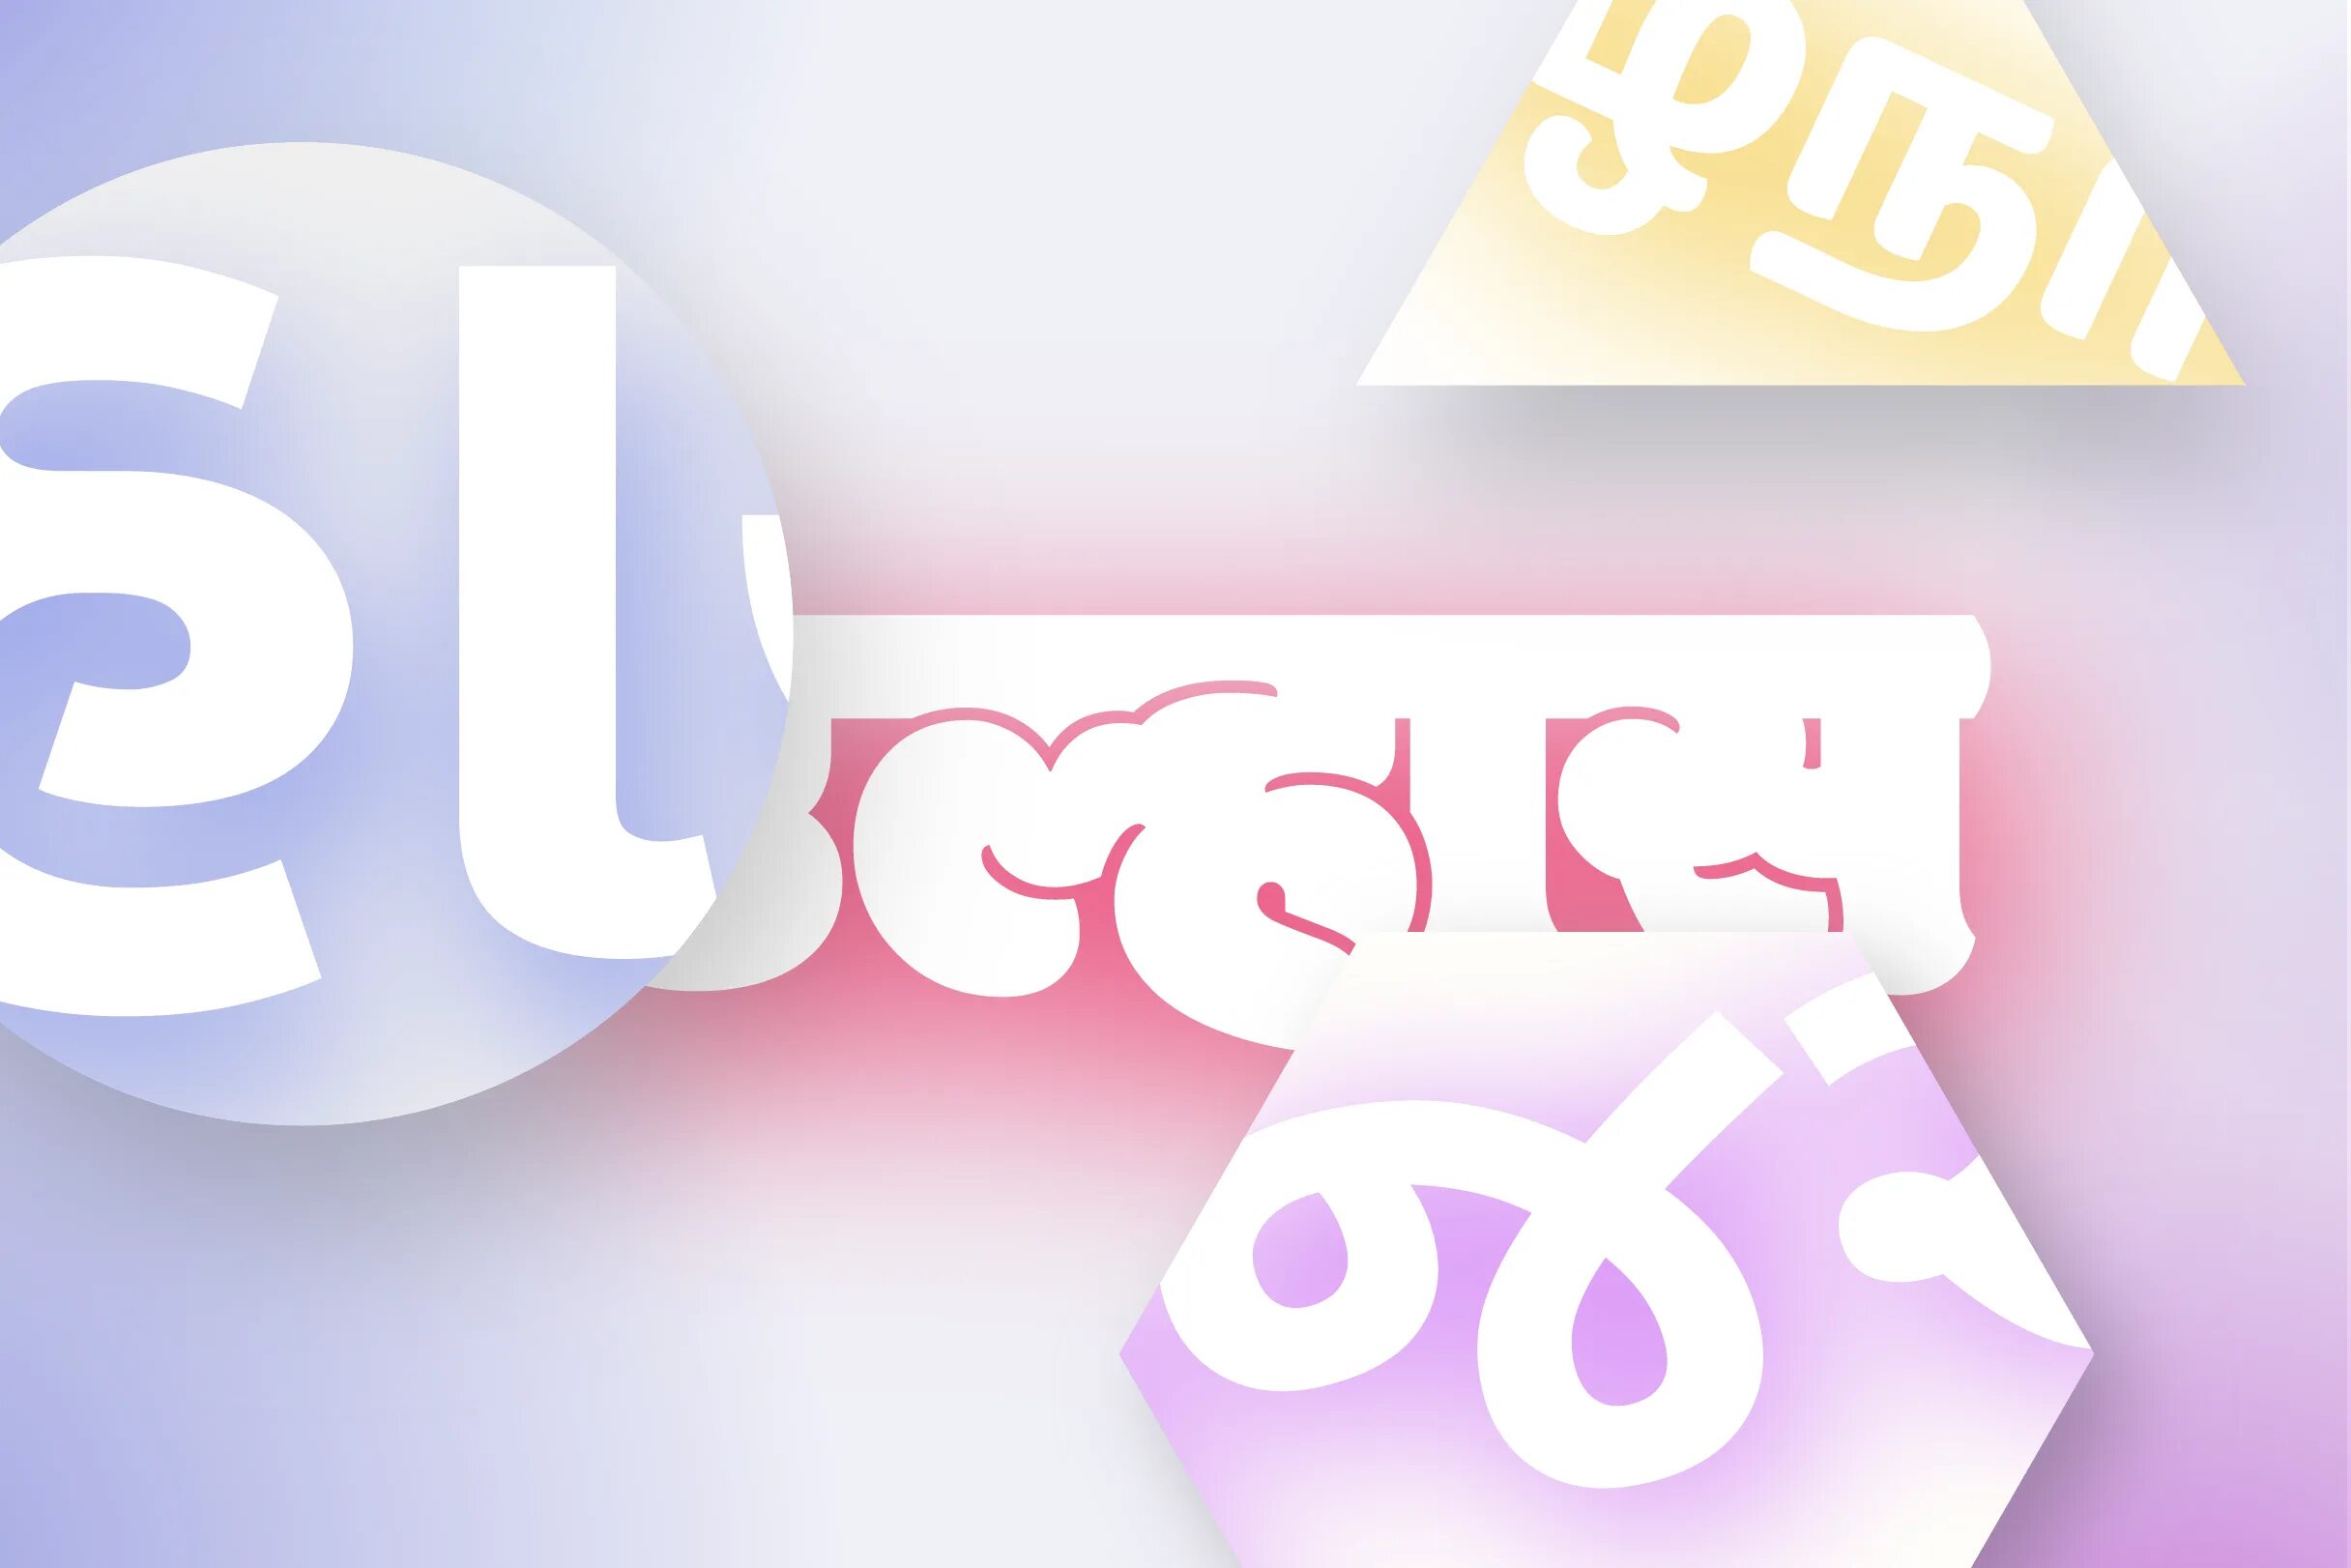 Шрифт New Wave. CN New Wave font. Text graphics